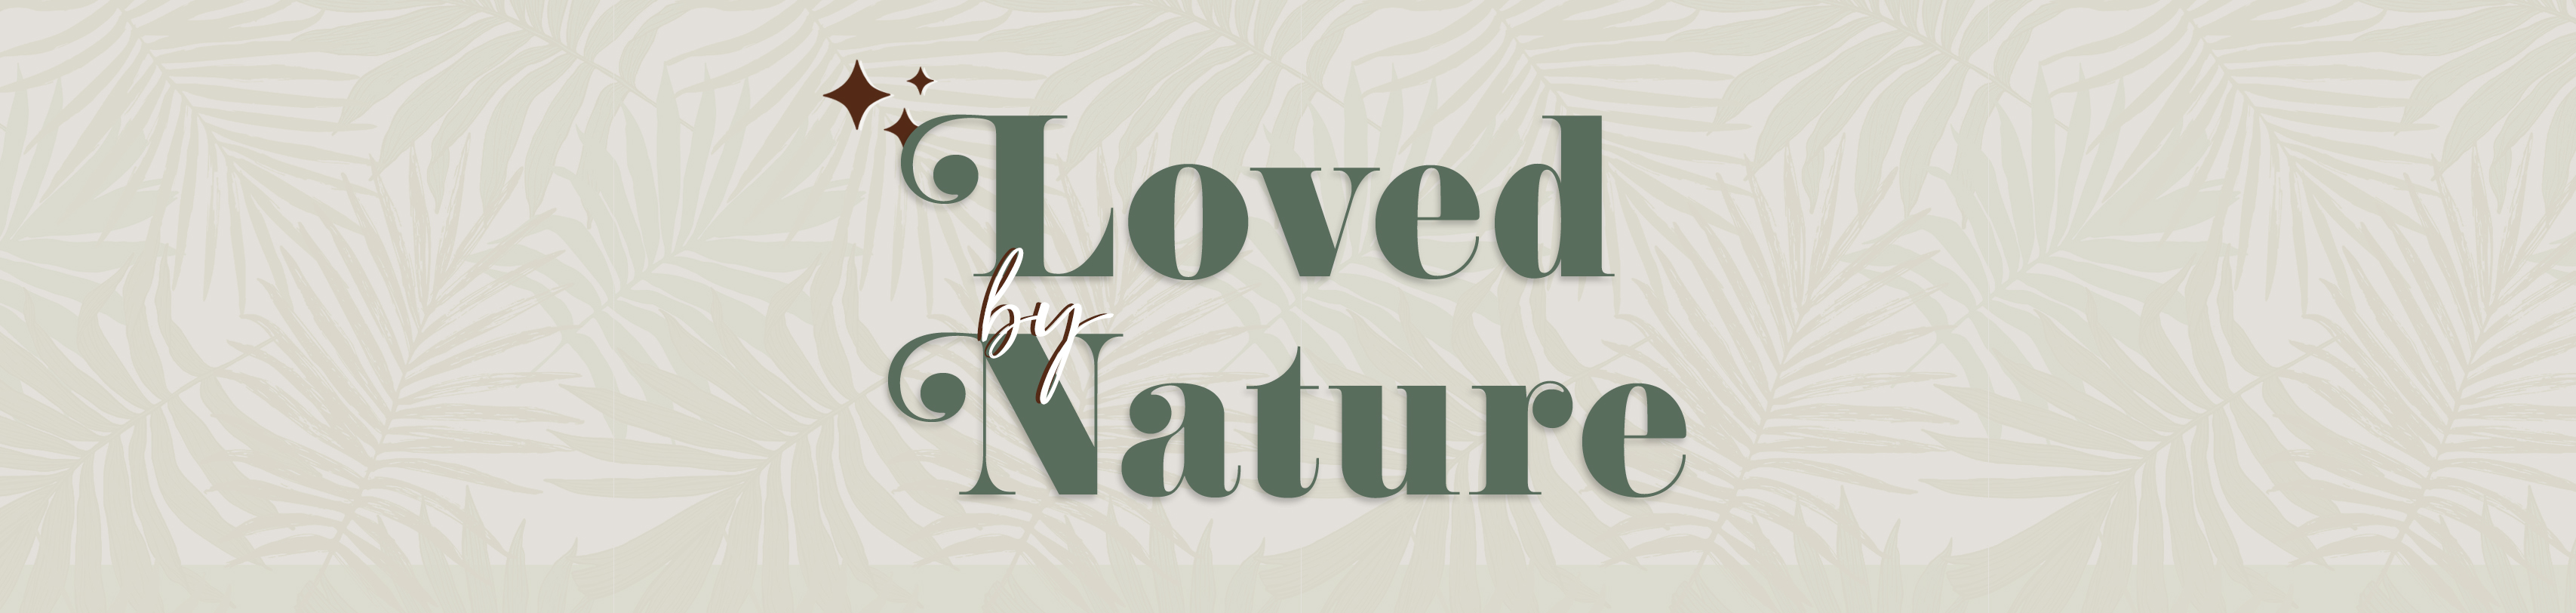 Loved by nature